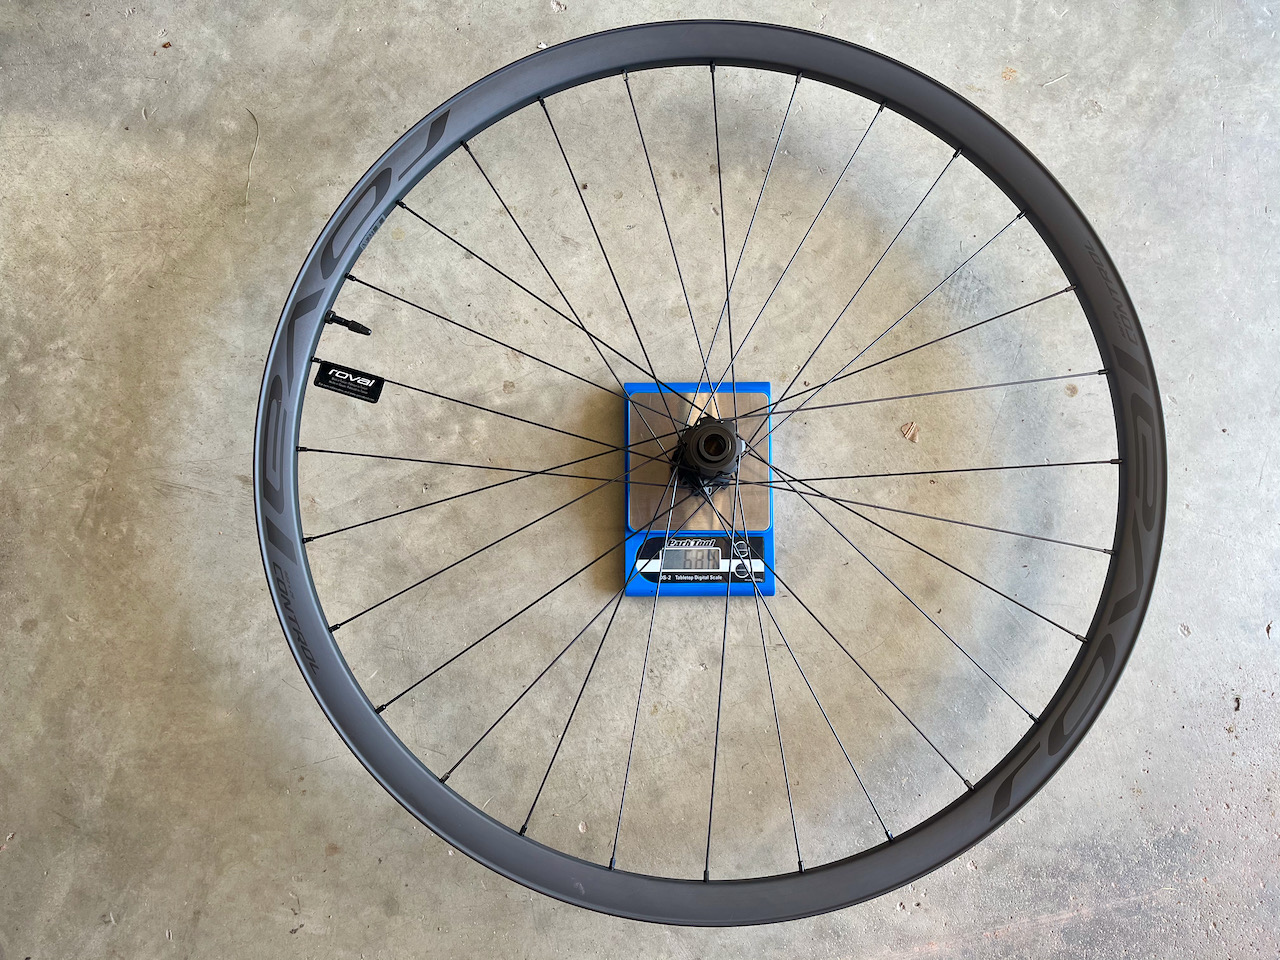 Roval's new Control Carbon wheelset offers SL performance at half